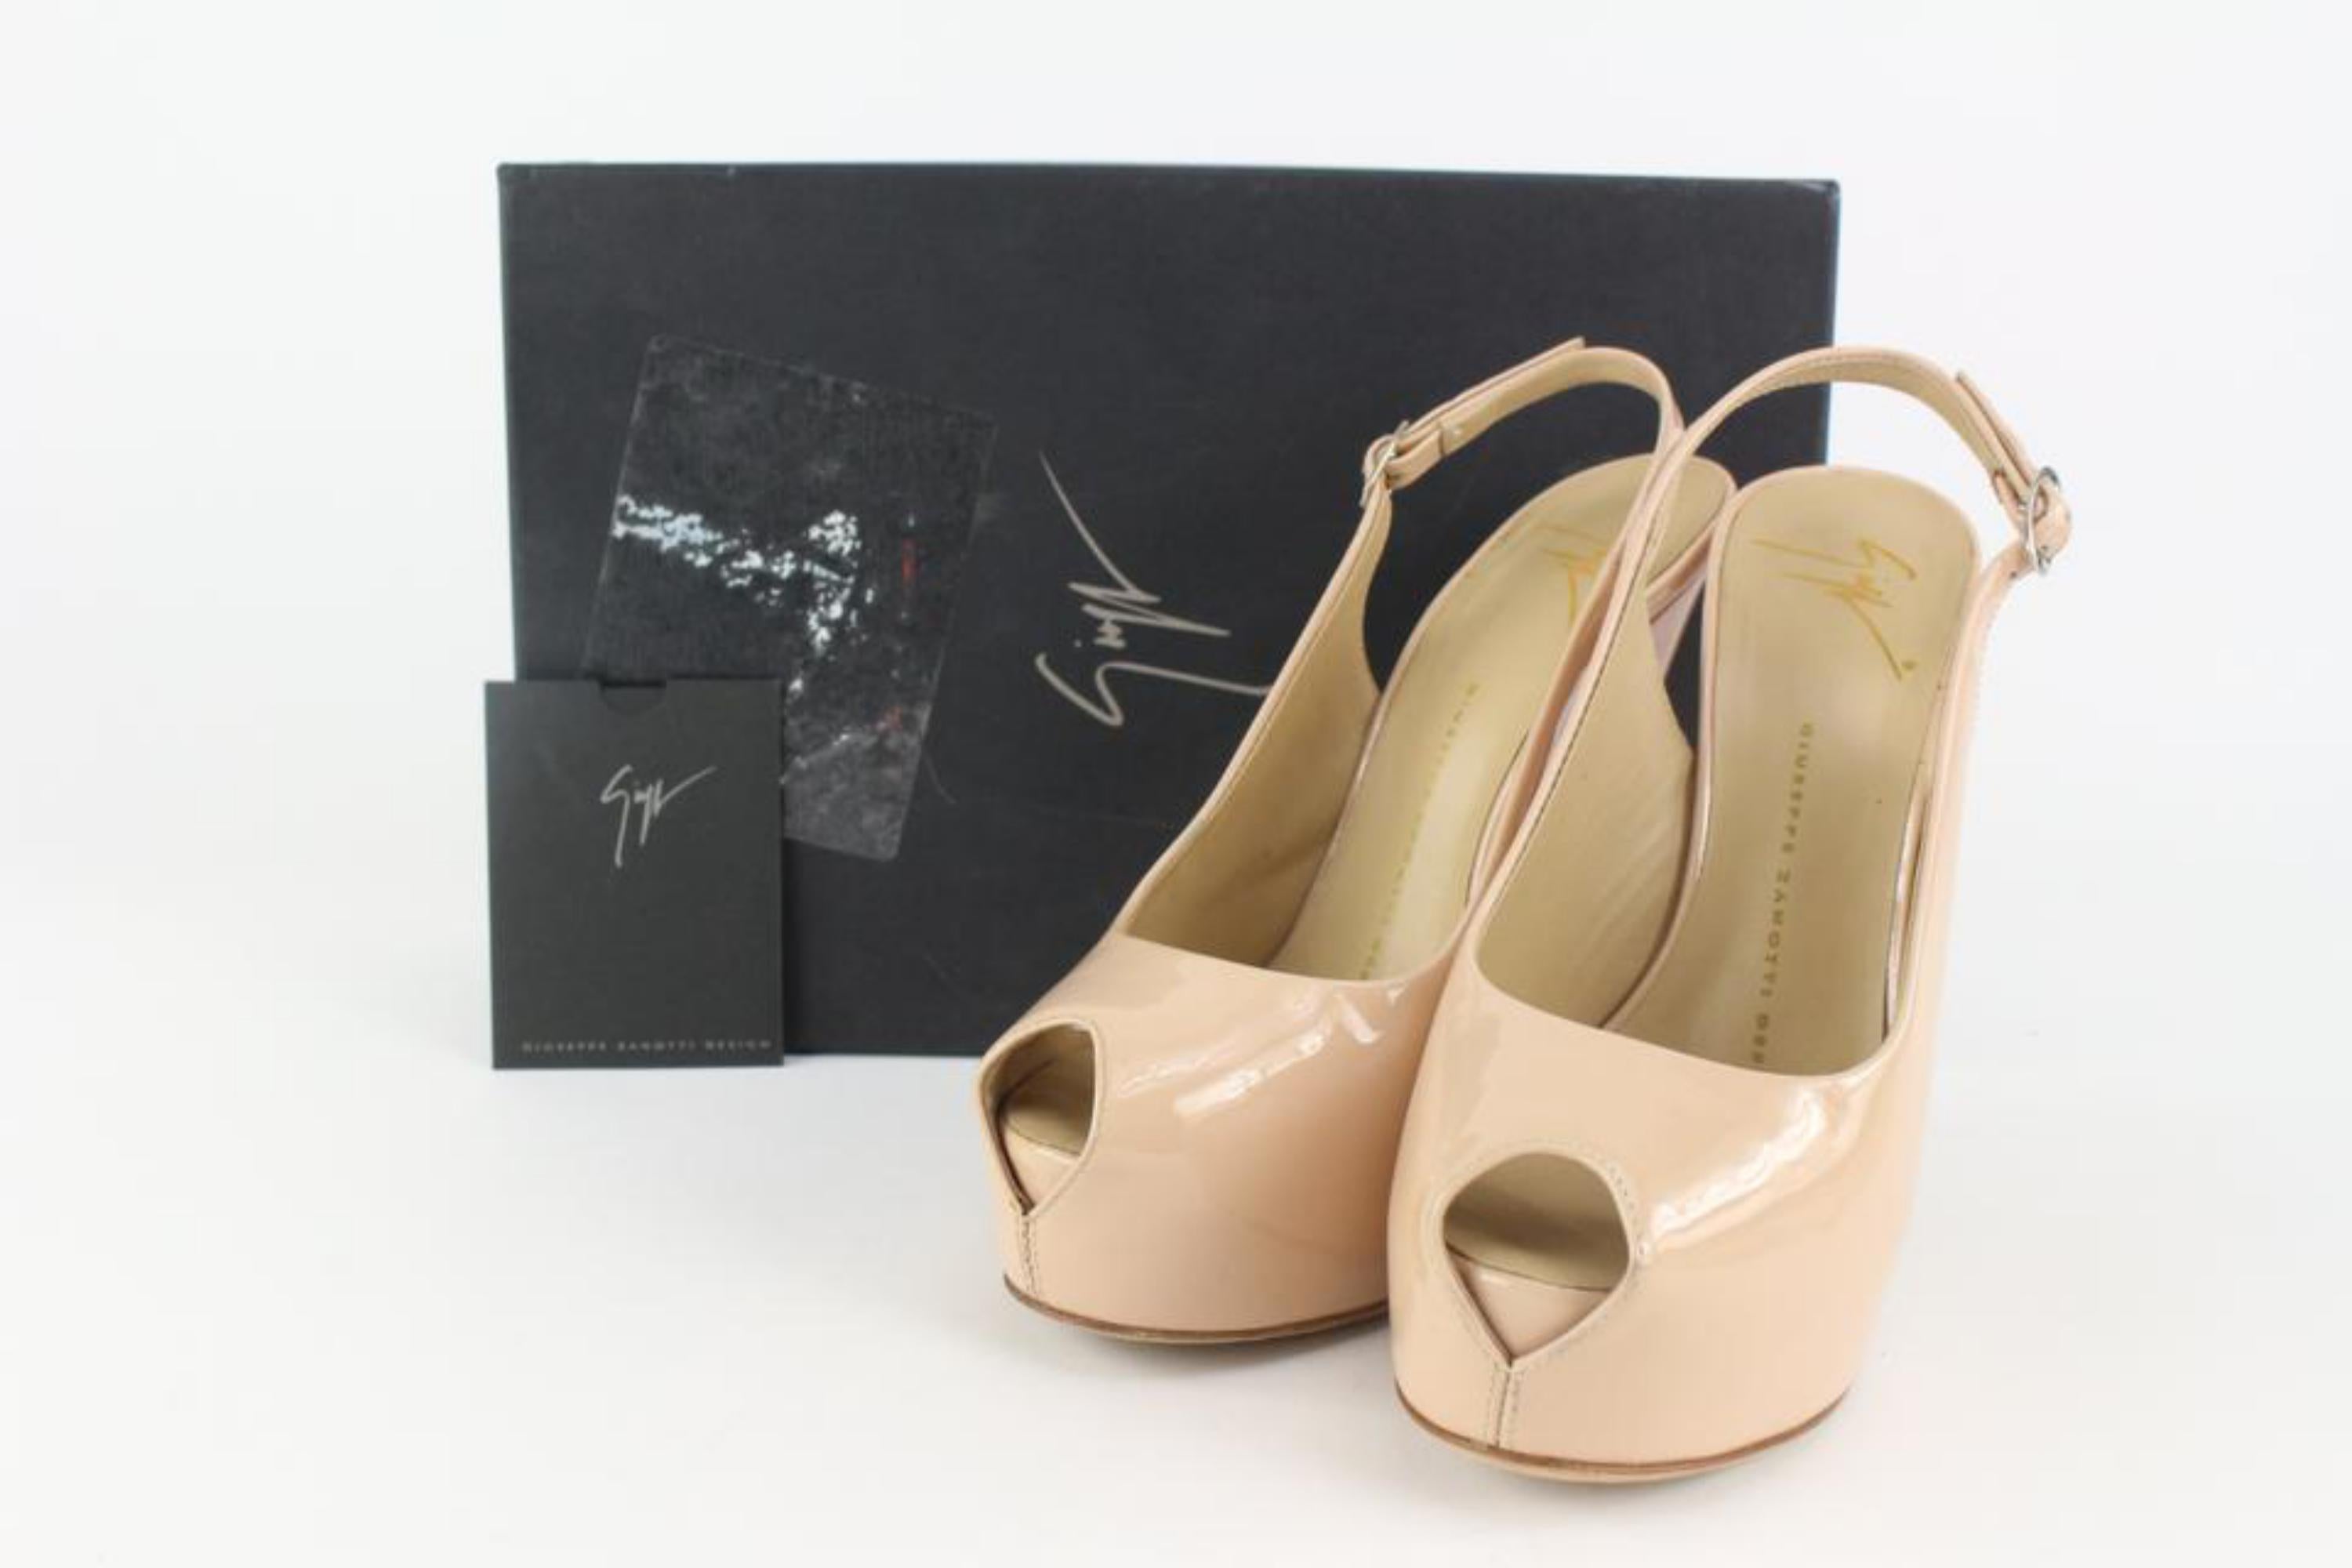 Giuseppe Zanotti Sz 36.5 Beige Patent Liza Slingback 129gz5
Date Code/Serial Number: 10000
Made In: Italy
Measurements: Length:  8